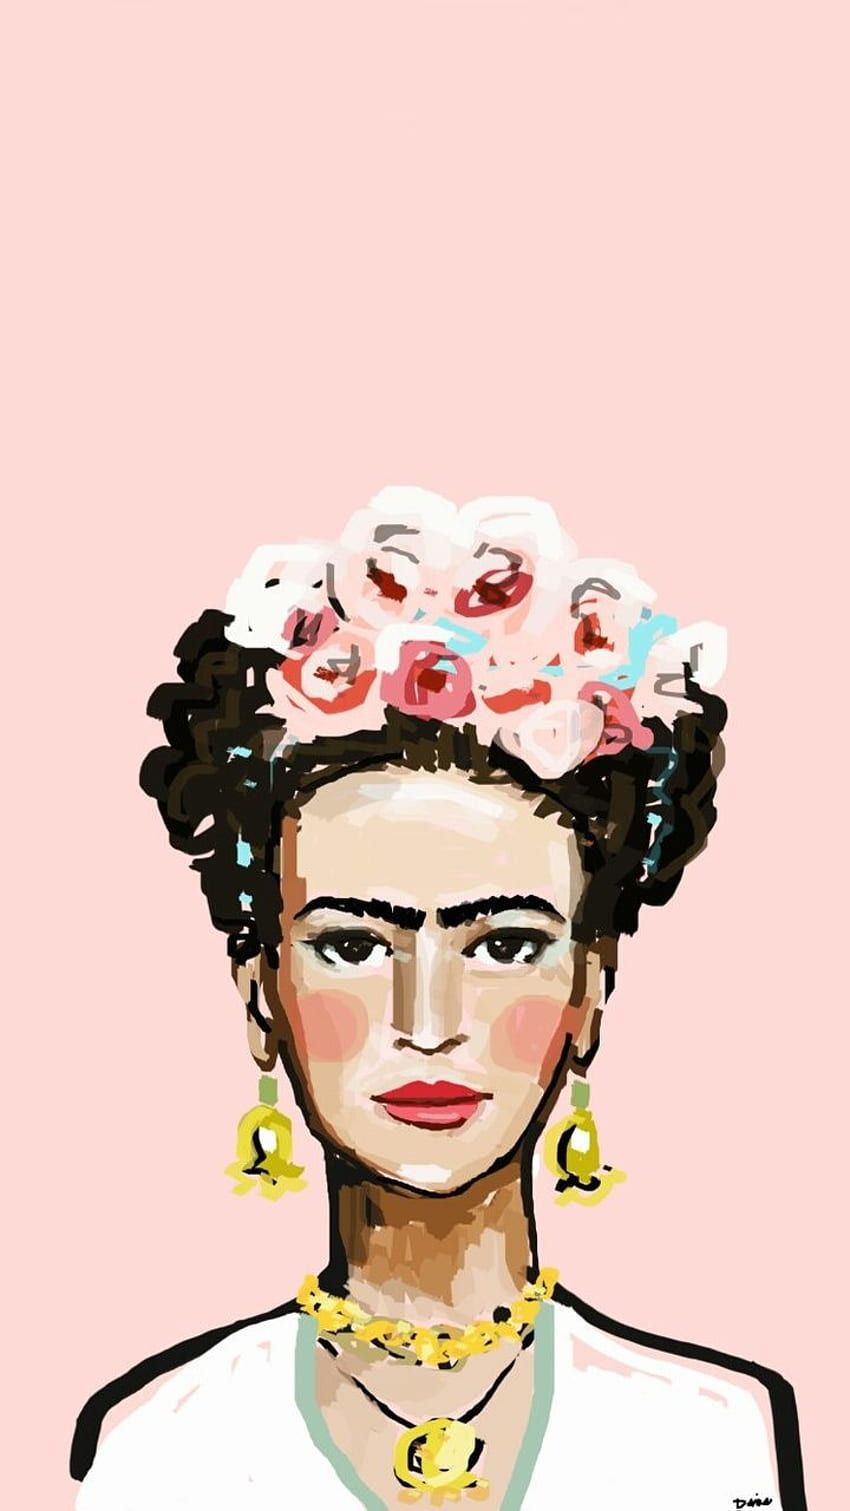 A digital painting of Frida Kahlo with flowers in her hair and a yellow necklace. - Frida Kahlo